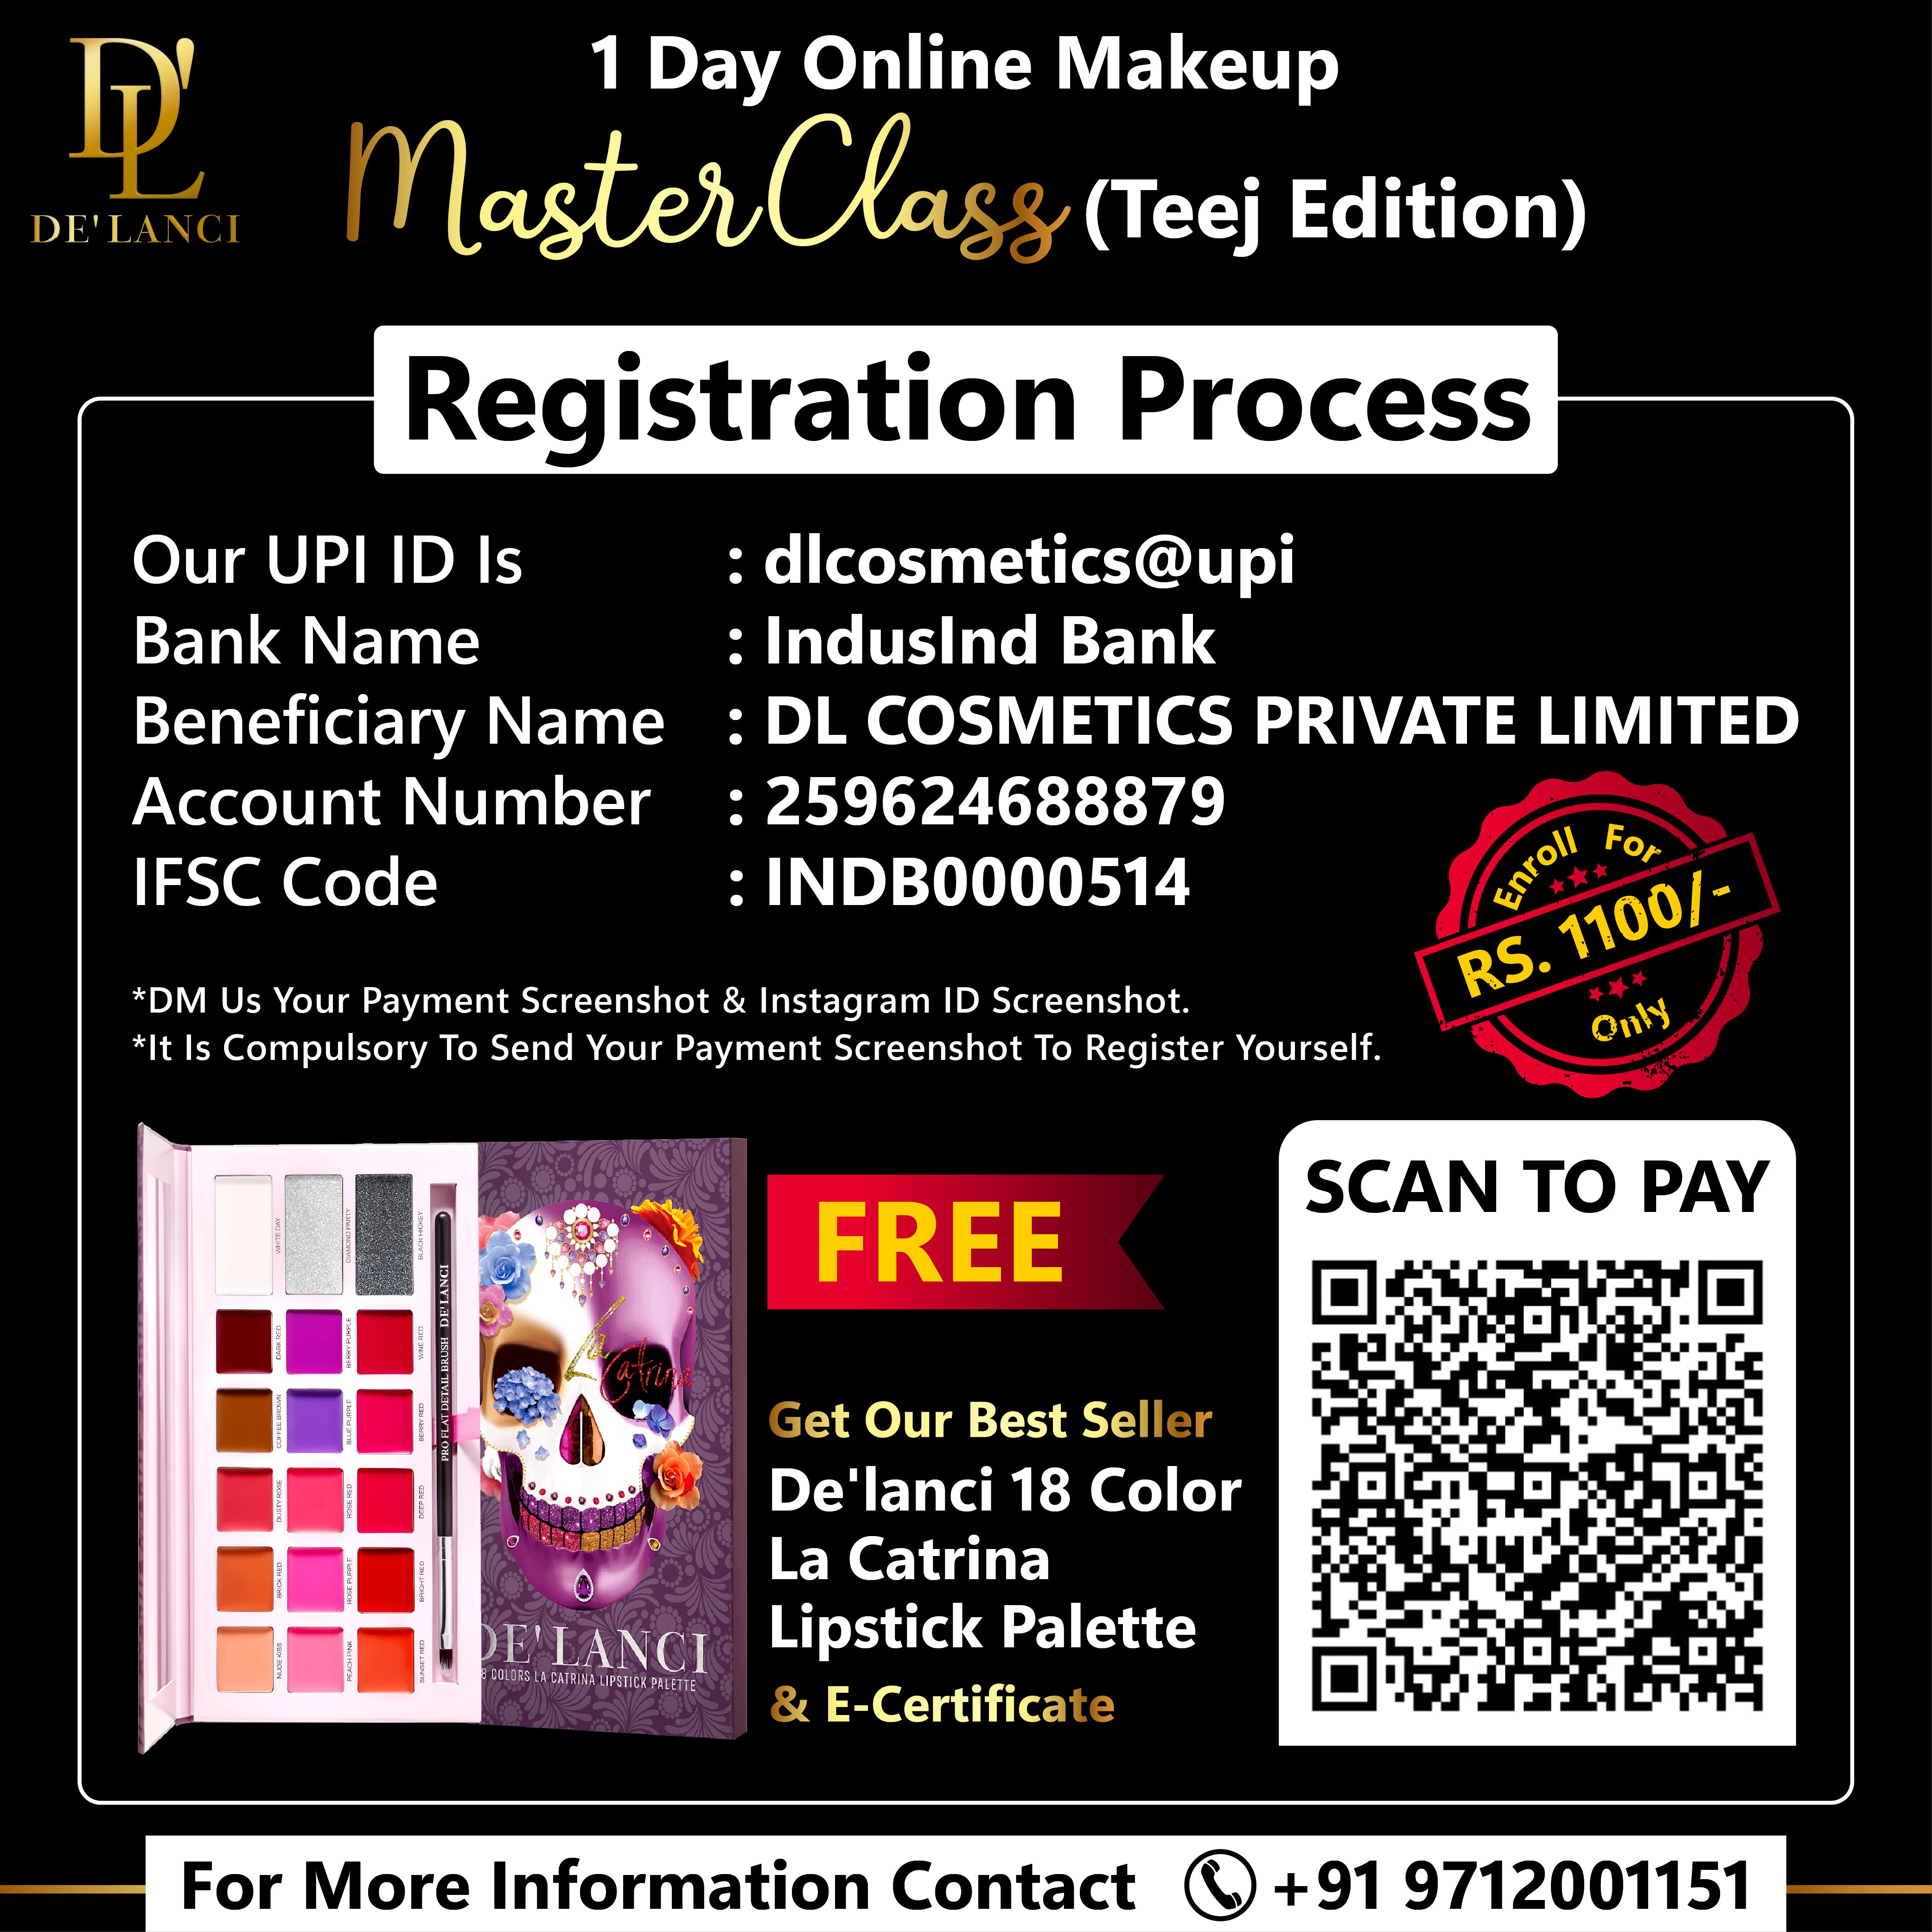 Teej Special Online Masterclass by De’lanci, Hosted by Megha Goyal - Fees 1100 & Get Lipstick Palette worth Rs. 2299